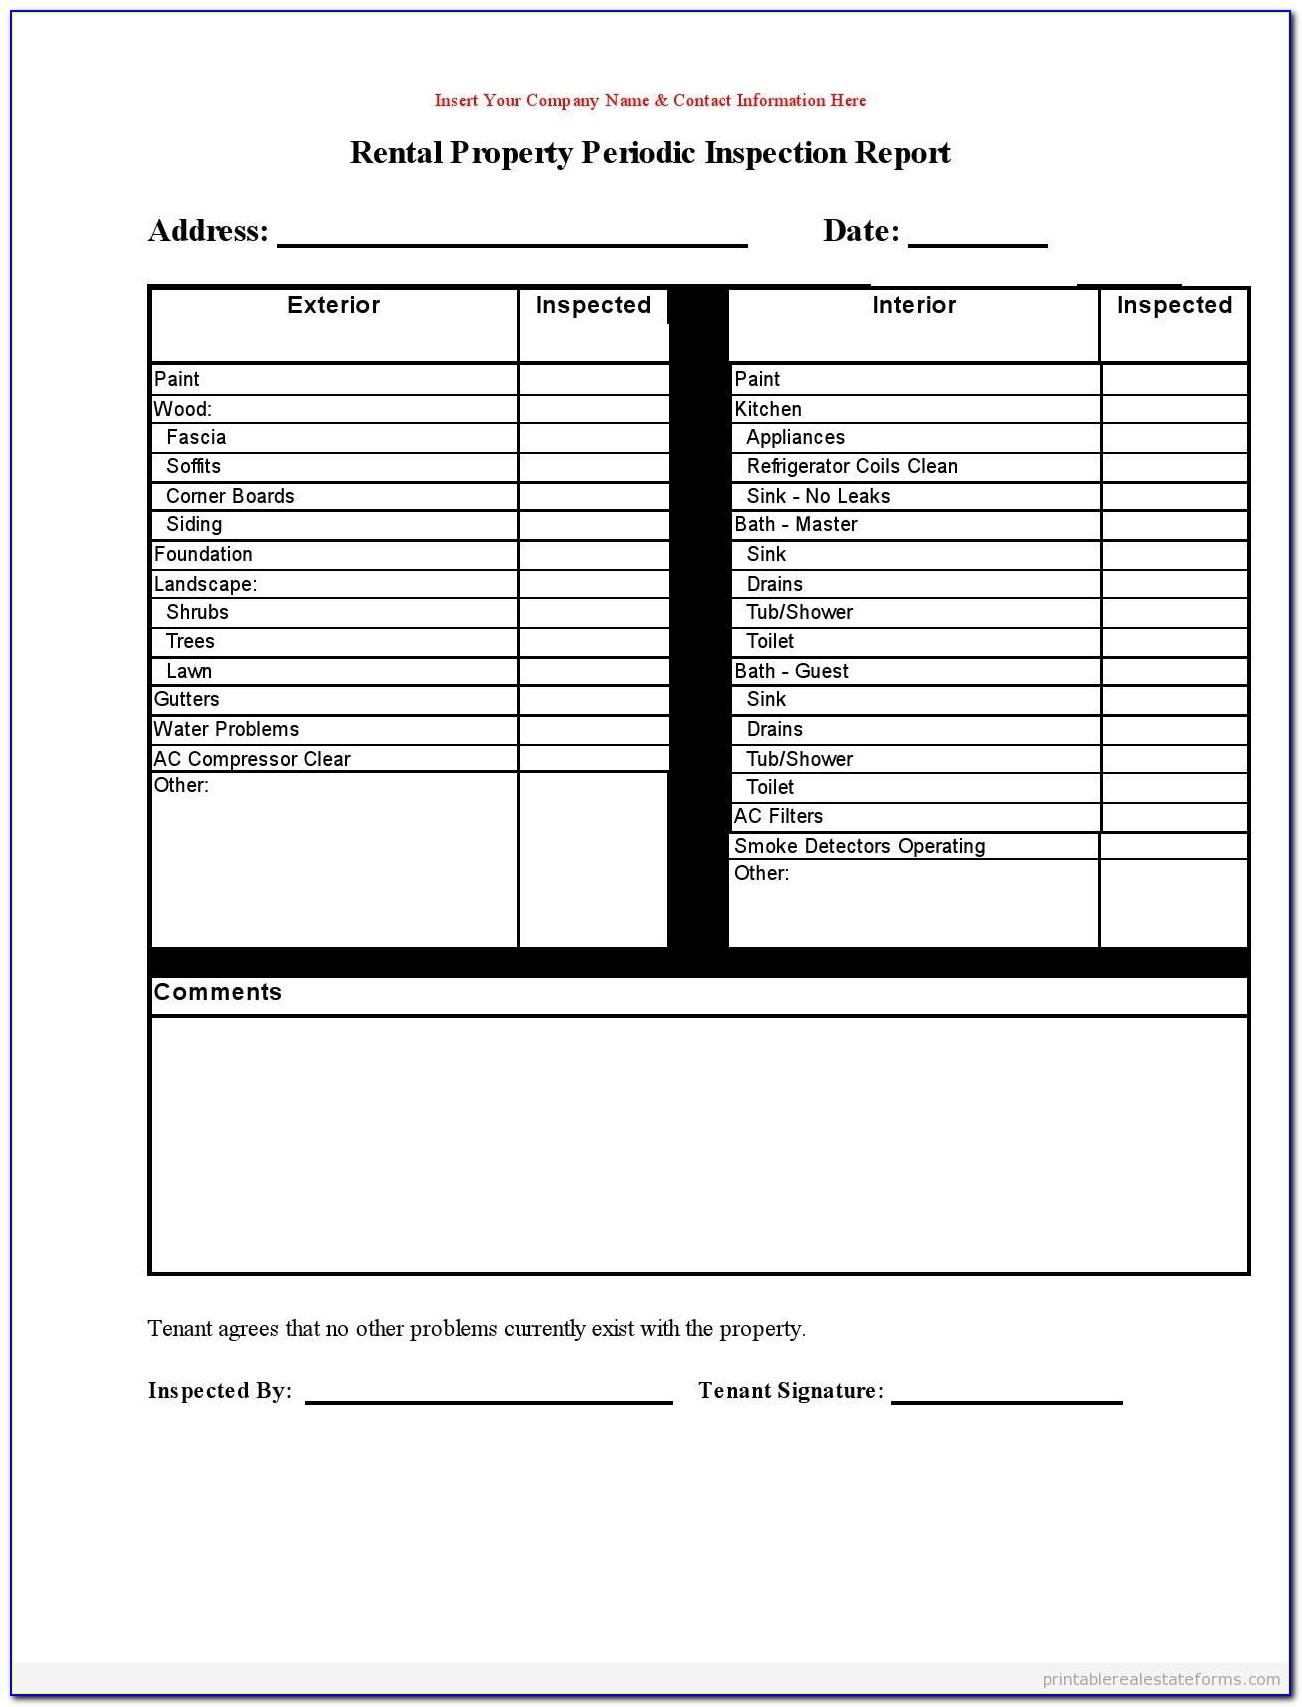 Rental Property Inspection Report Template Free